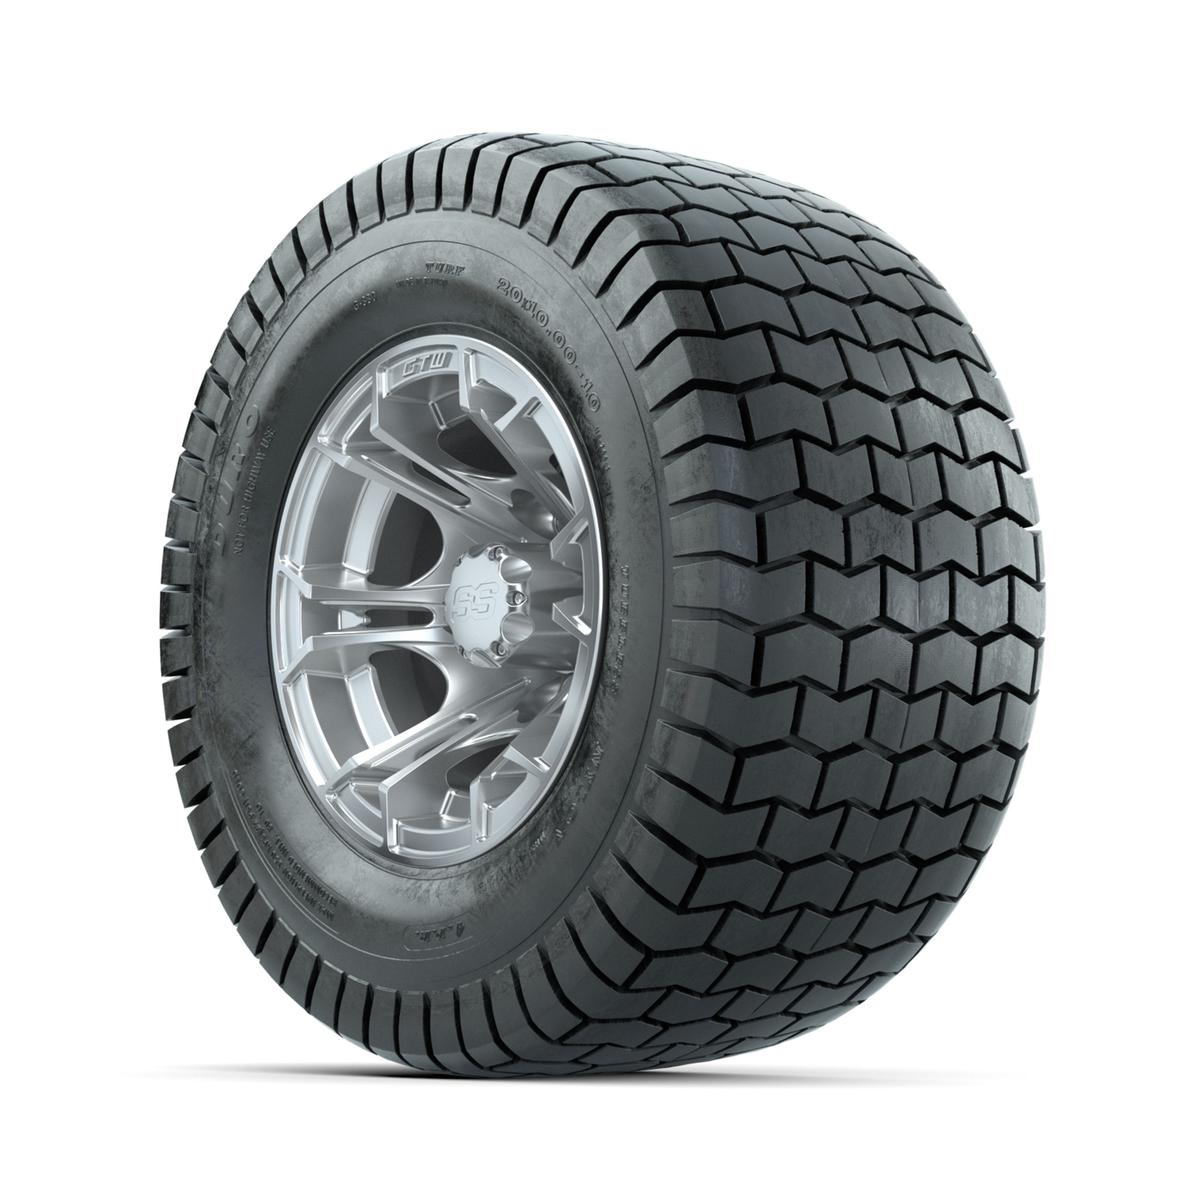 GTW Spyder Silver Brush 10 in Wheels with 20x10-10 Duro Soft Street Tires – Full Set